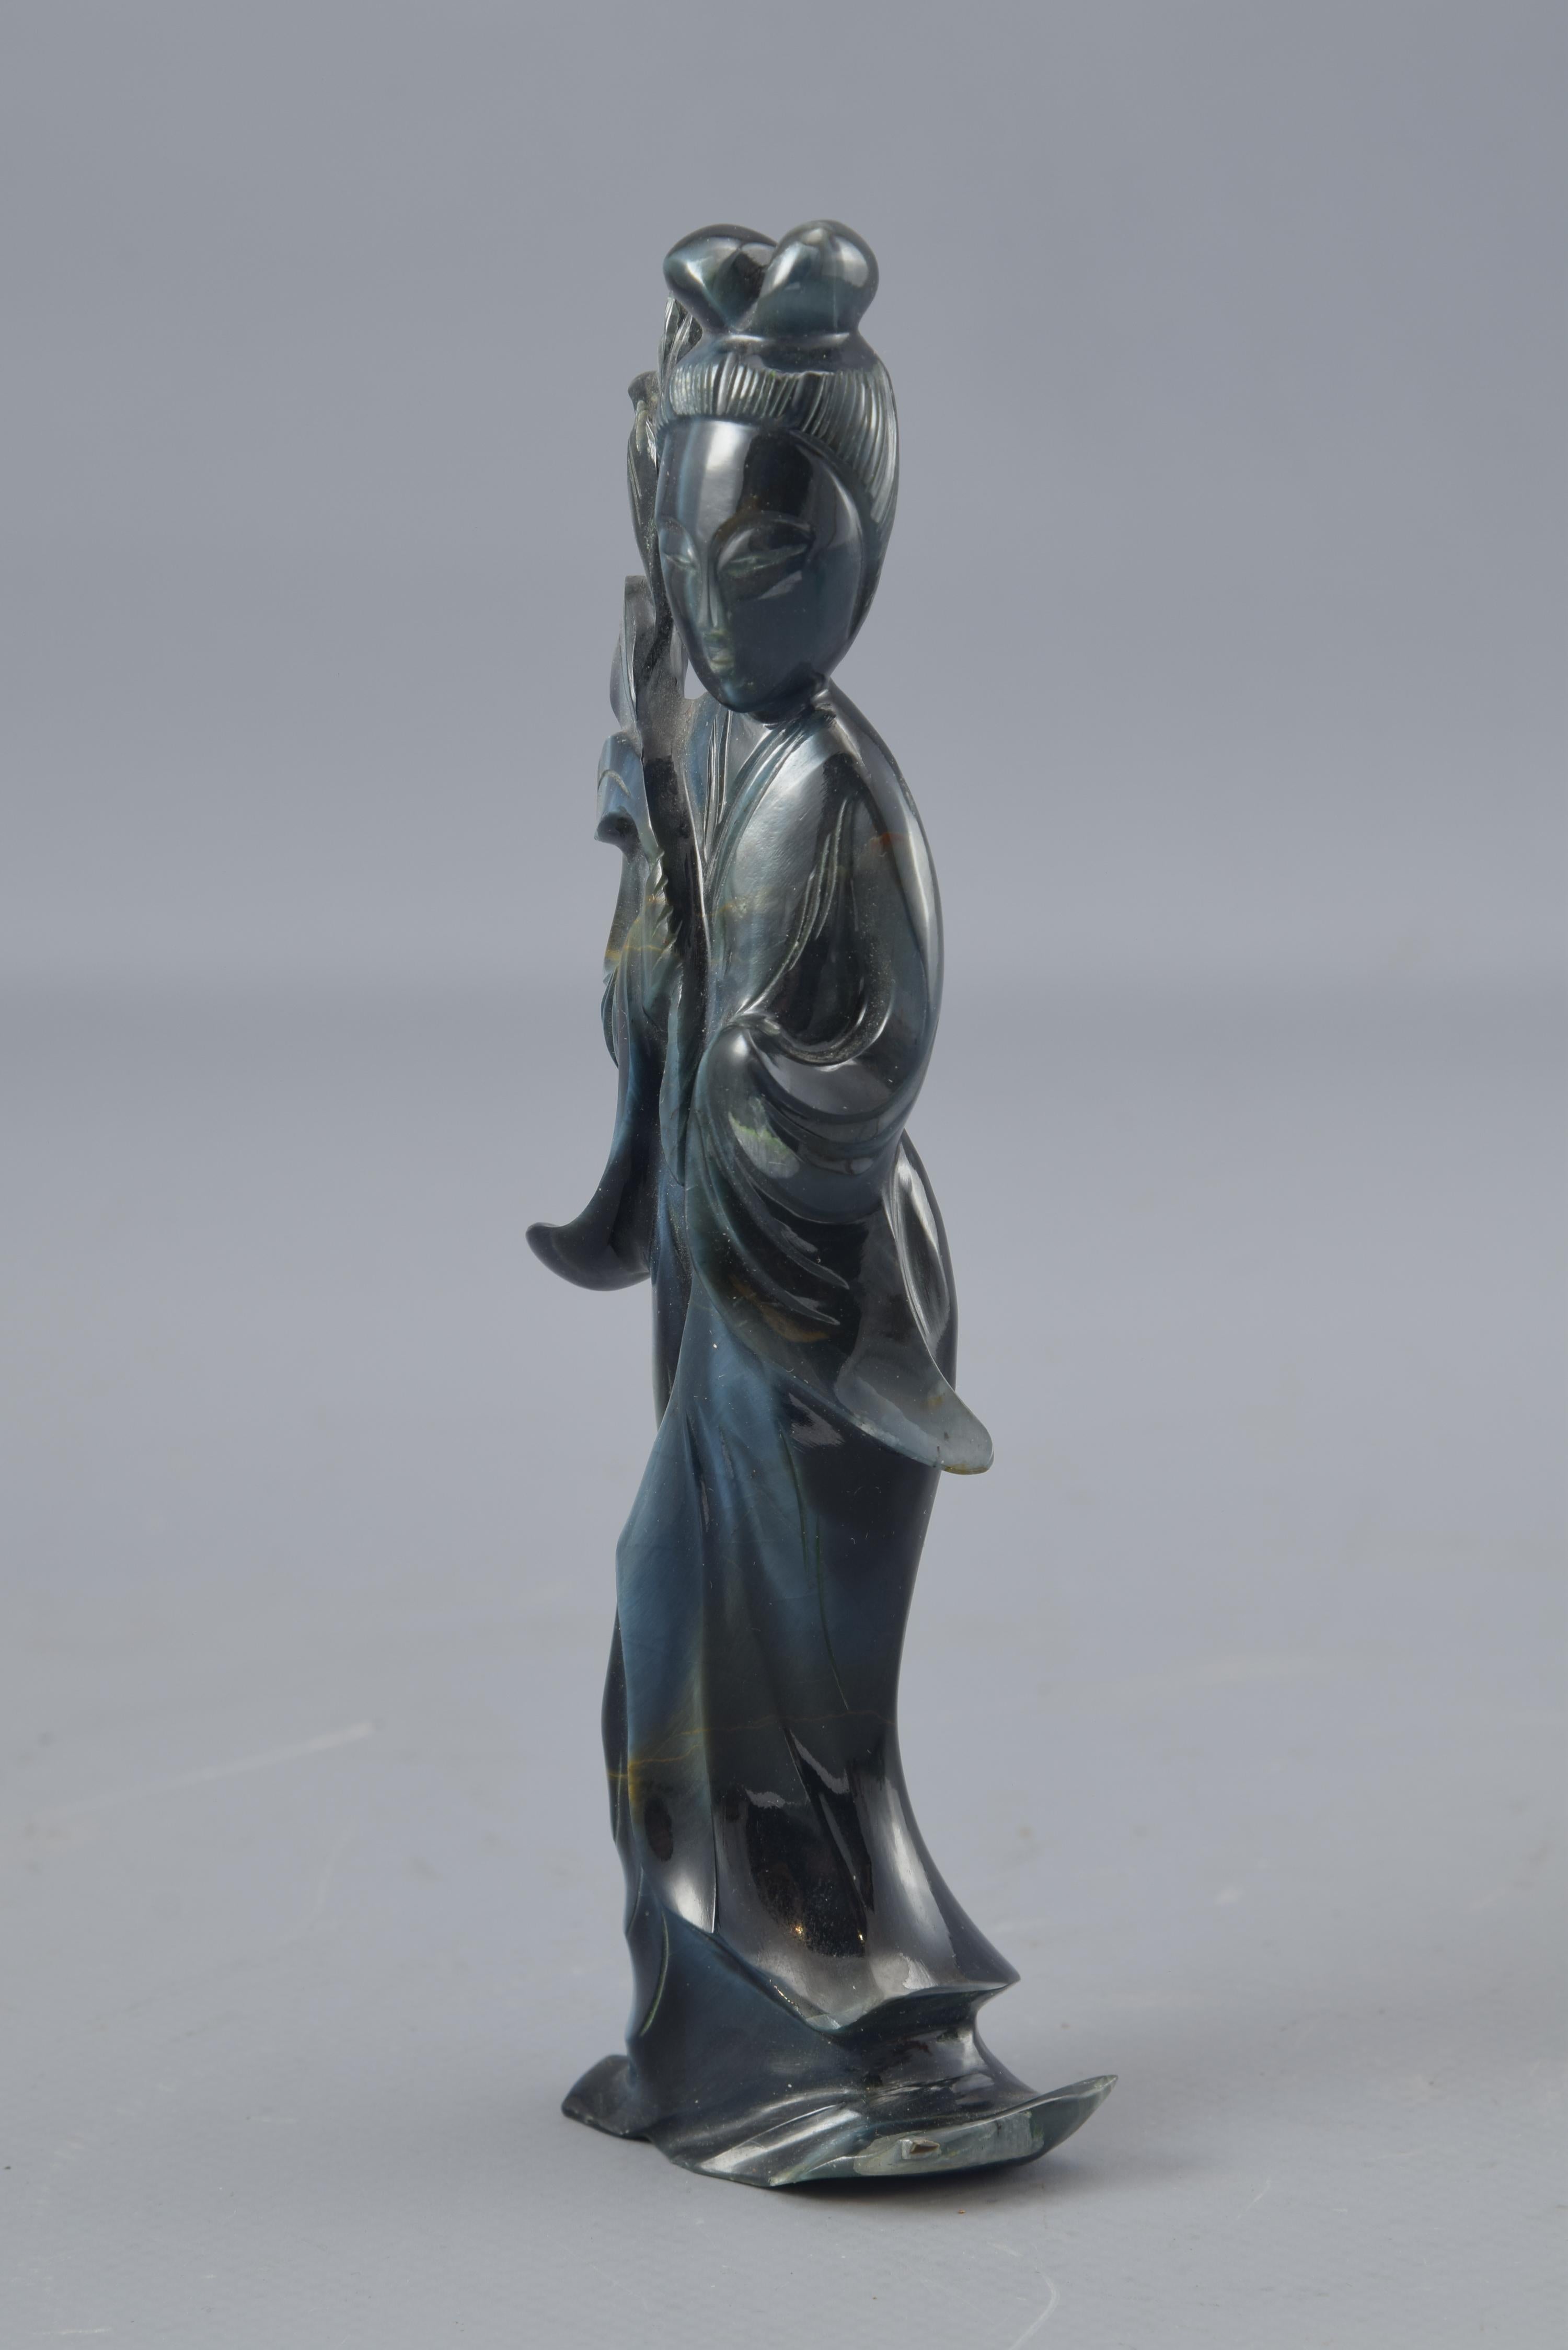 Stylized figure made of hard stone with a dark tone, with a vein in lighter colors that perhaps represents one of the eight immortals of the Taoist pantheon, He Xiangu (who is usually shown holding a lotus flower, sometimes also accompanied by a